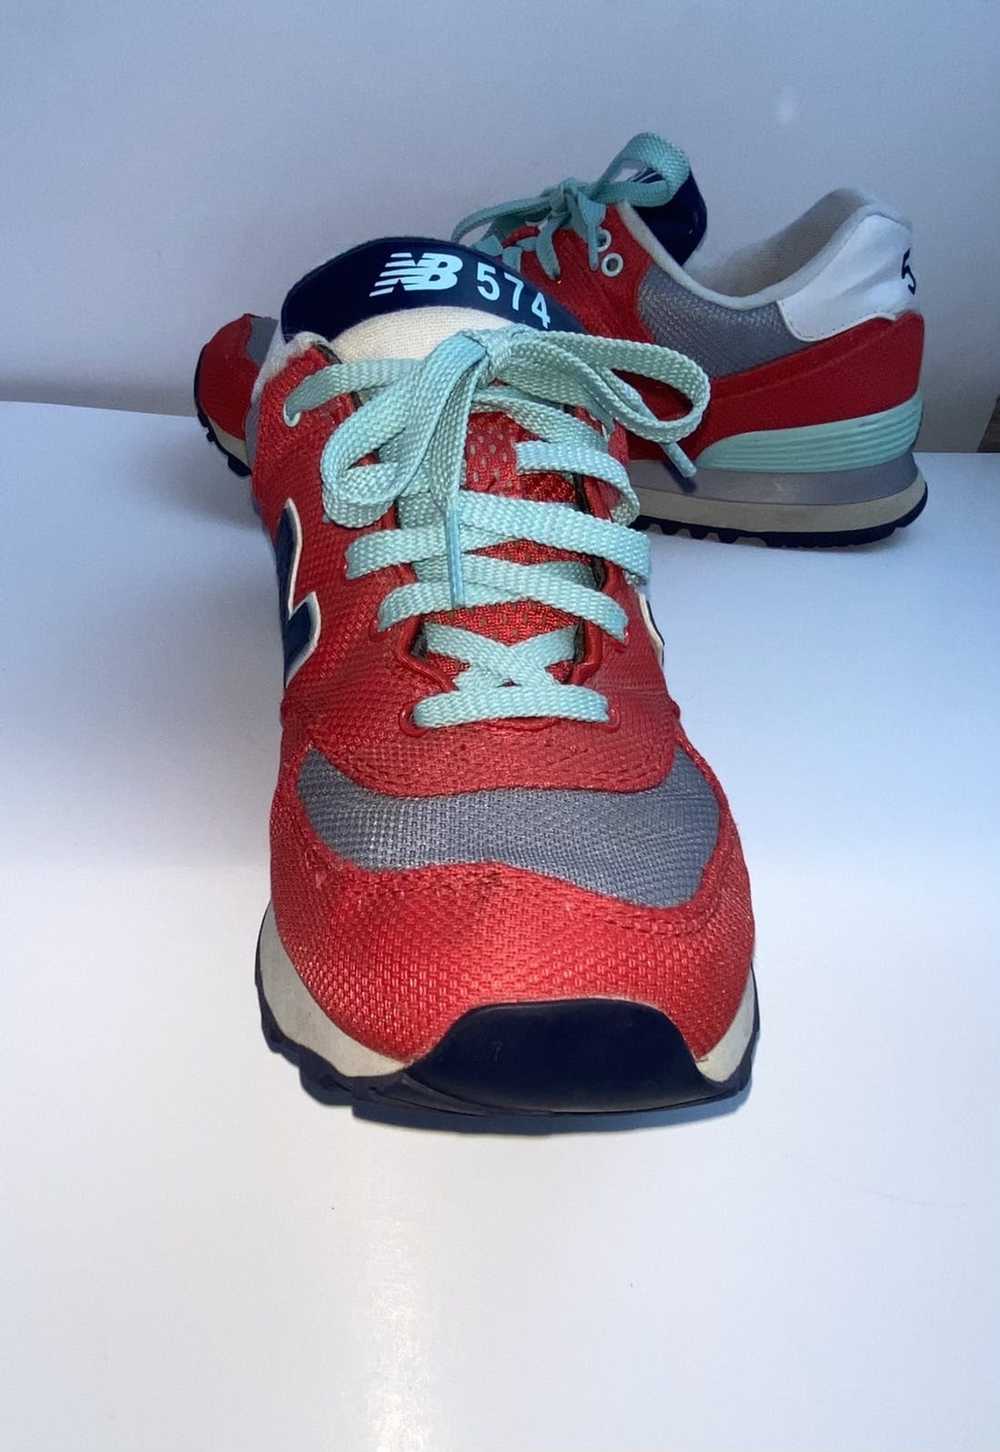 New Balance New Balance 574 Econ red teal shoes - image 7